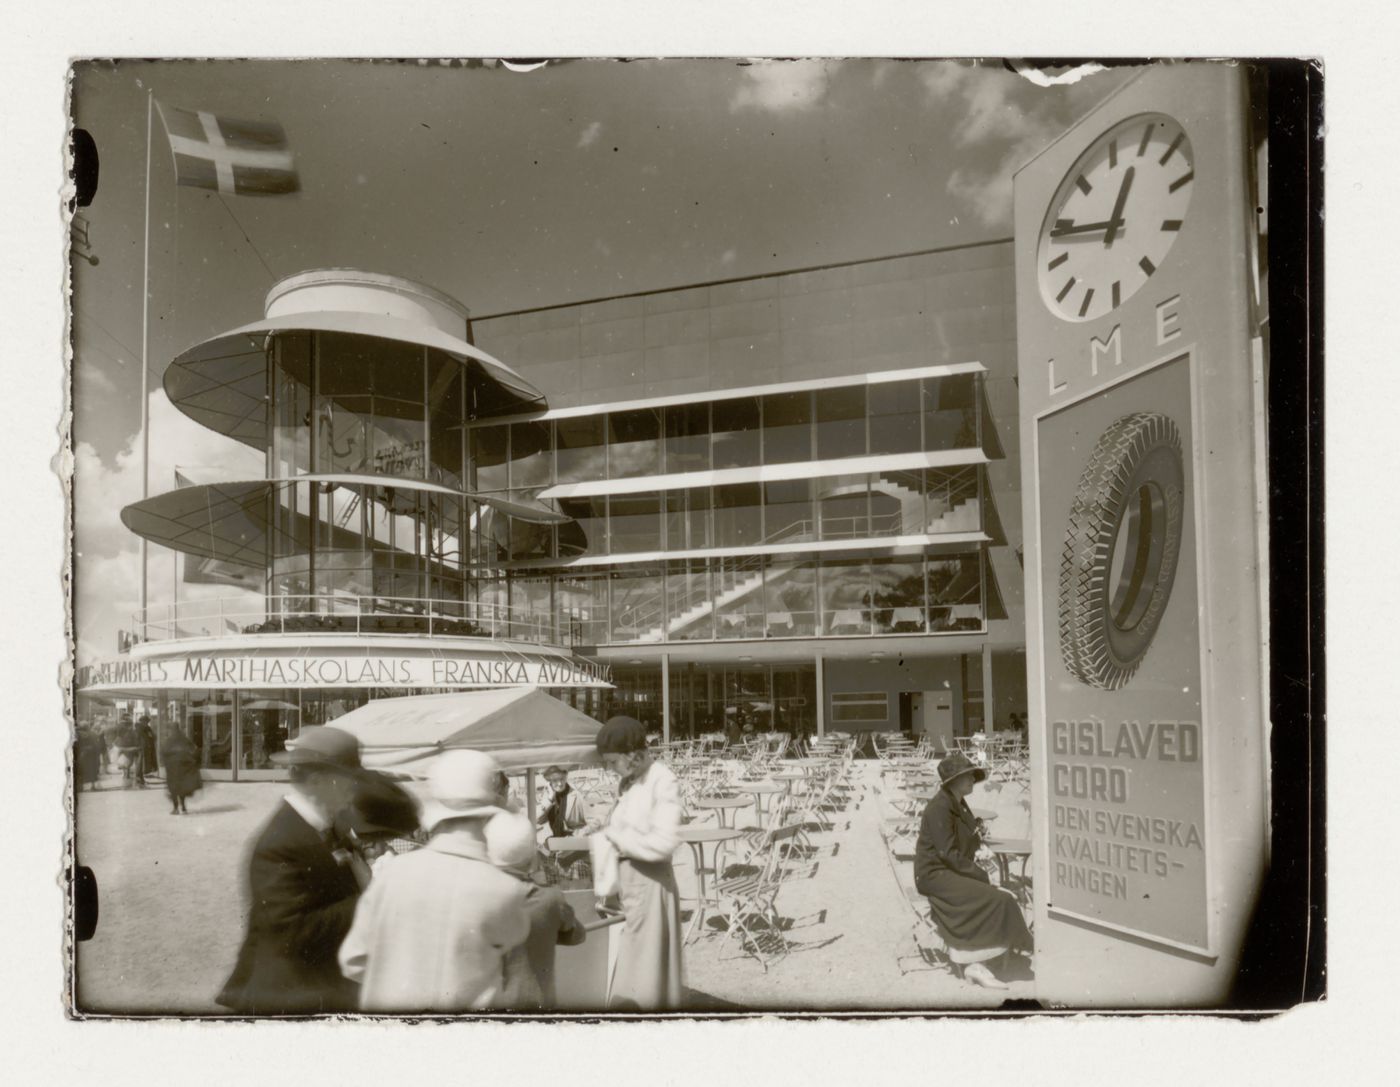 View of the lateral façade of Paradise Restaurant at the Stockholm Exhibition of 1930 showing the terrace and an advertising post in the foreground, Stockholm